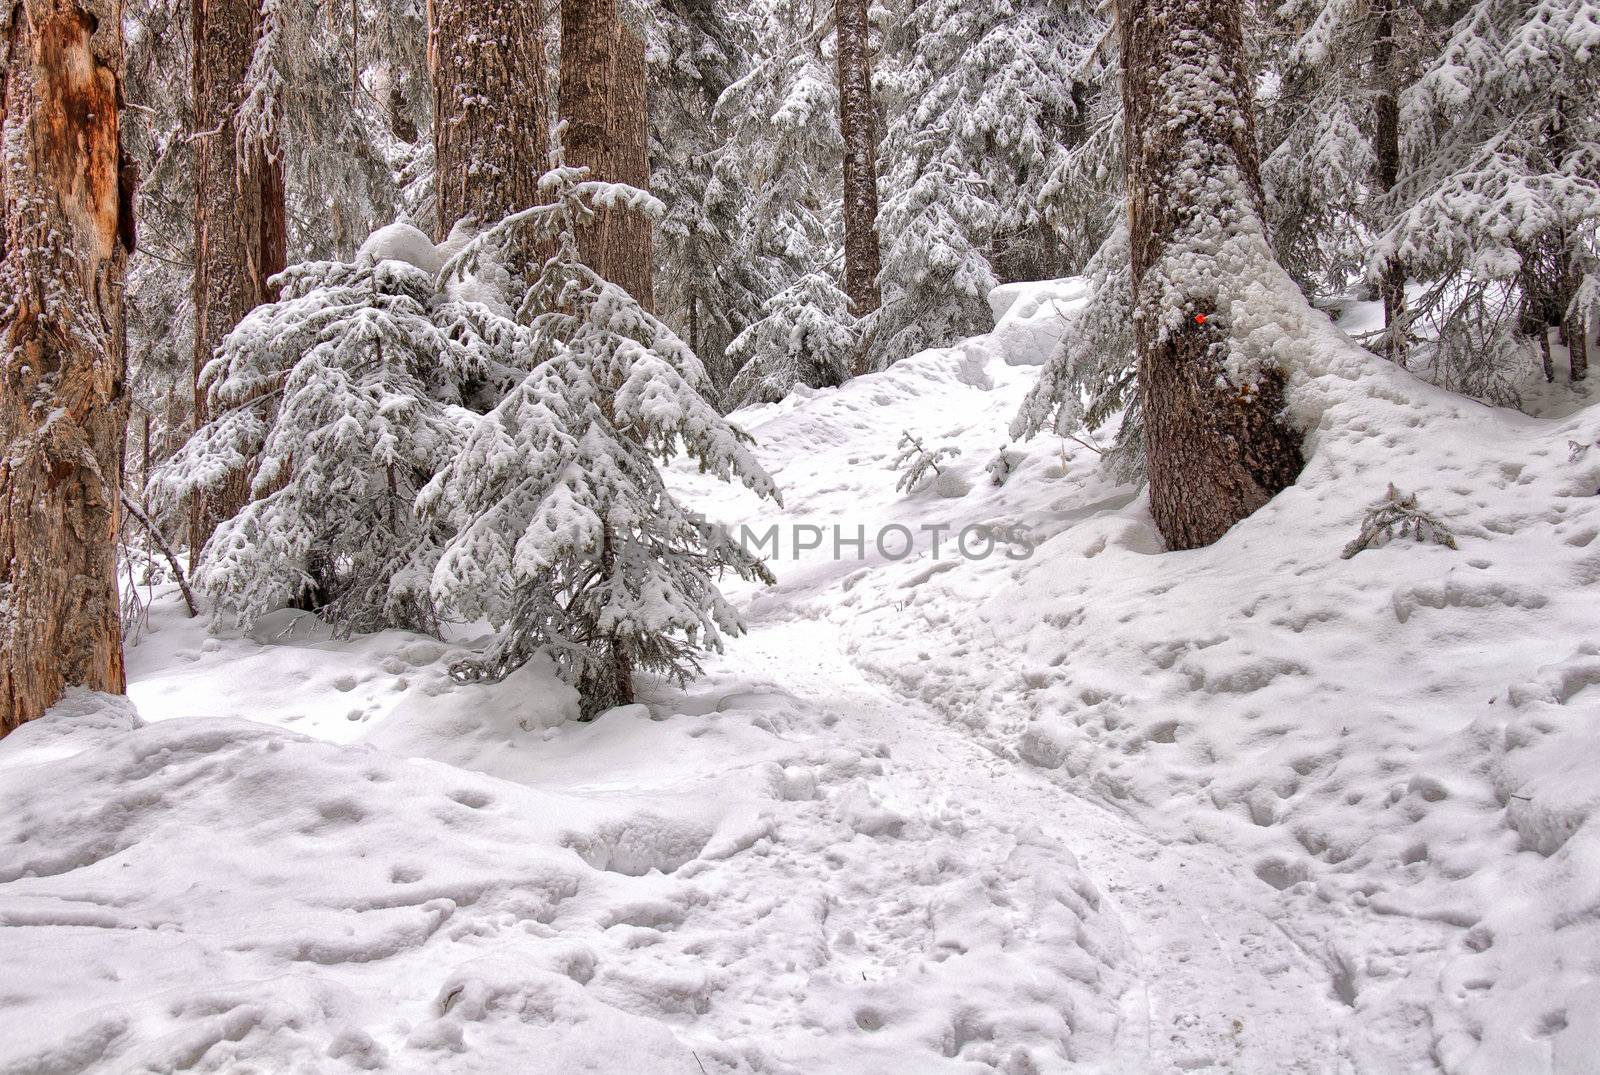 Marked snowshoe trail leads through snow covered trees.